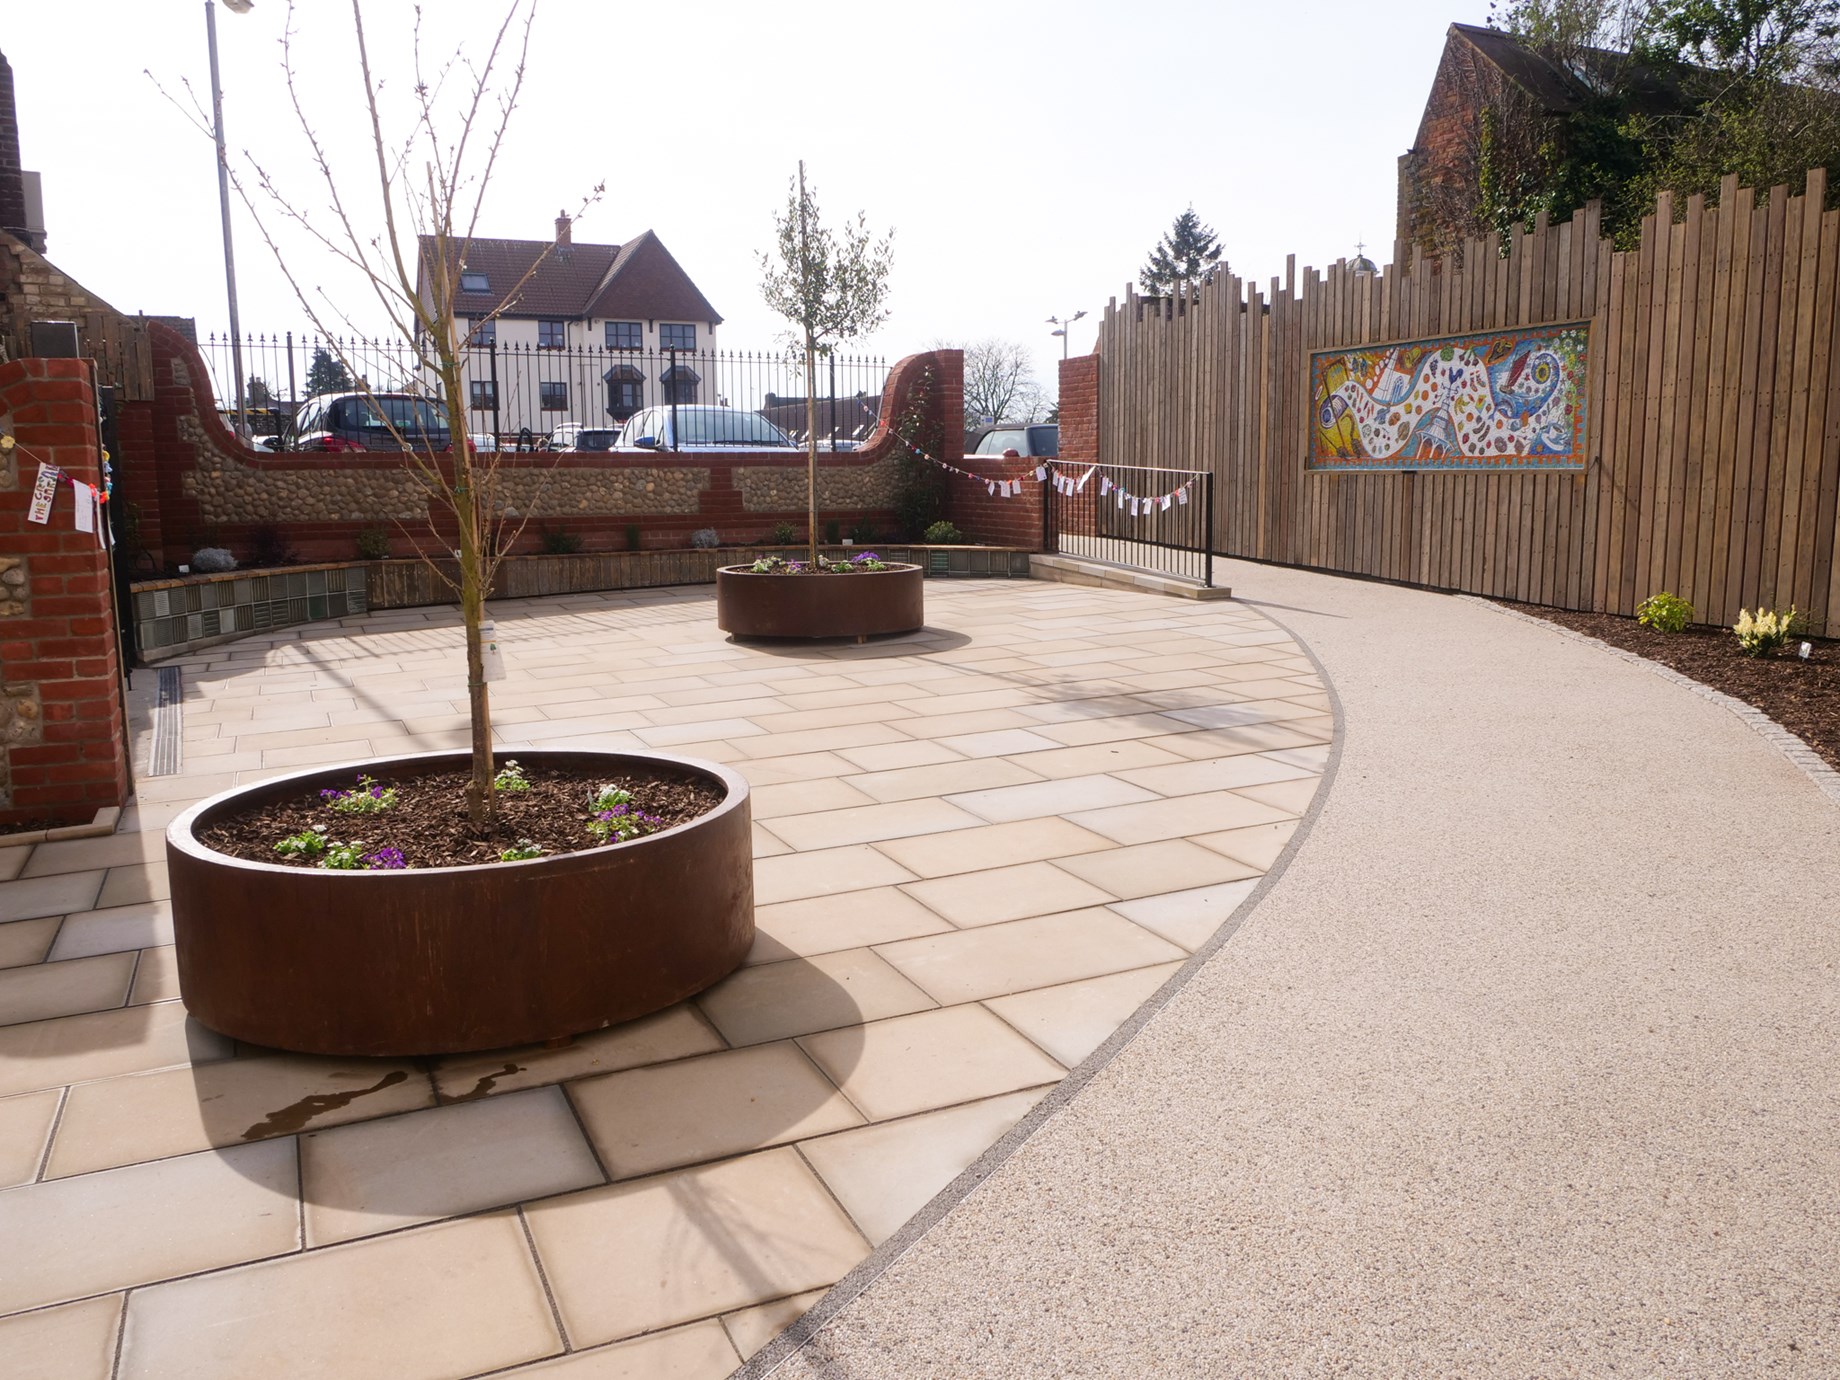 Black Swan Loke - featuring the mosaic, tree planters and newly paved area.